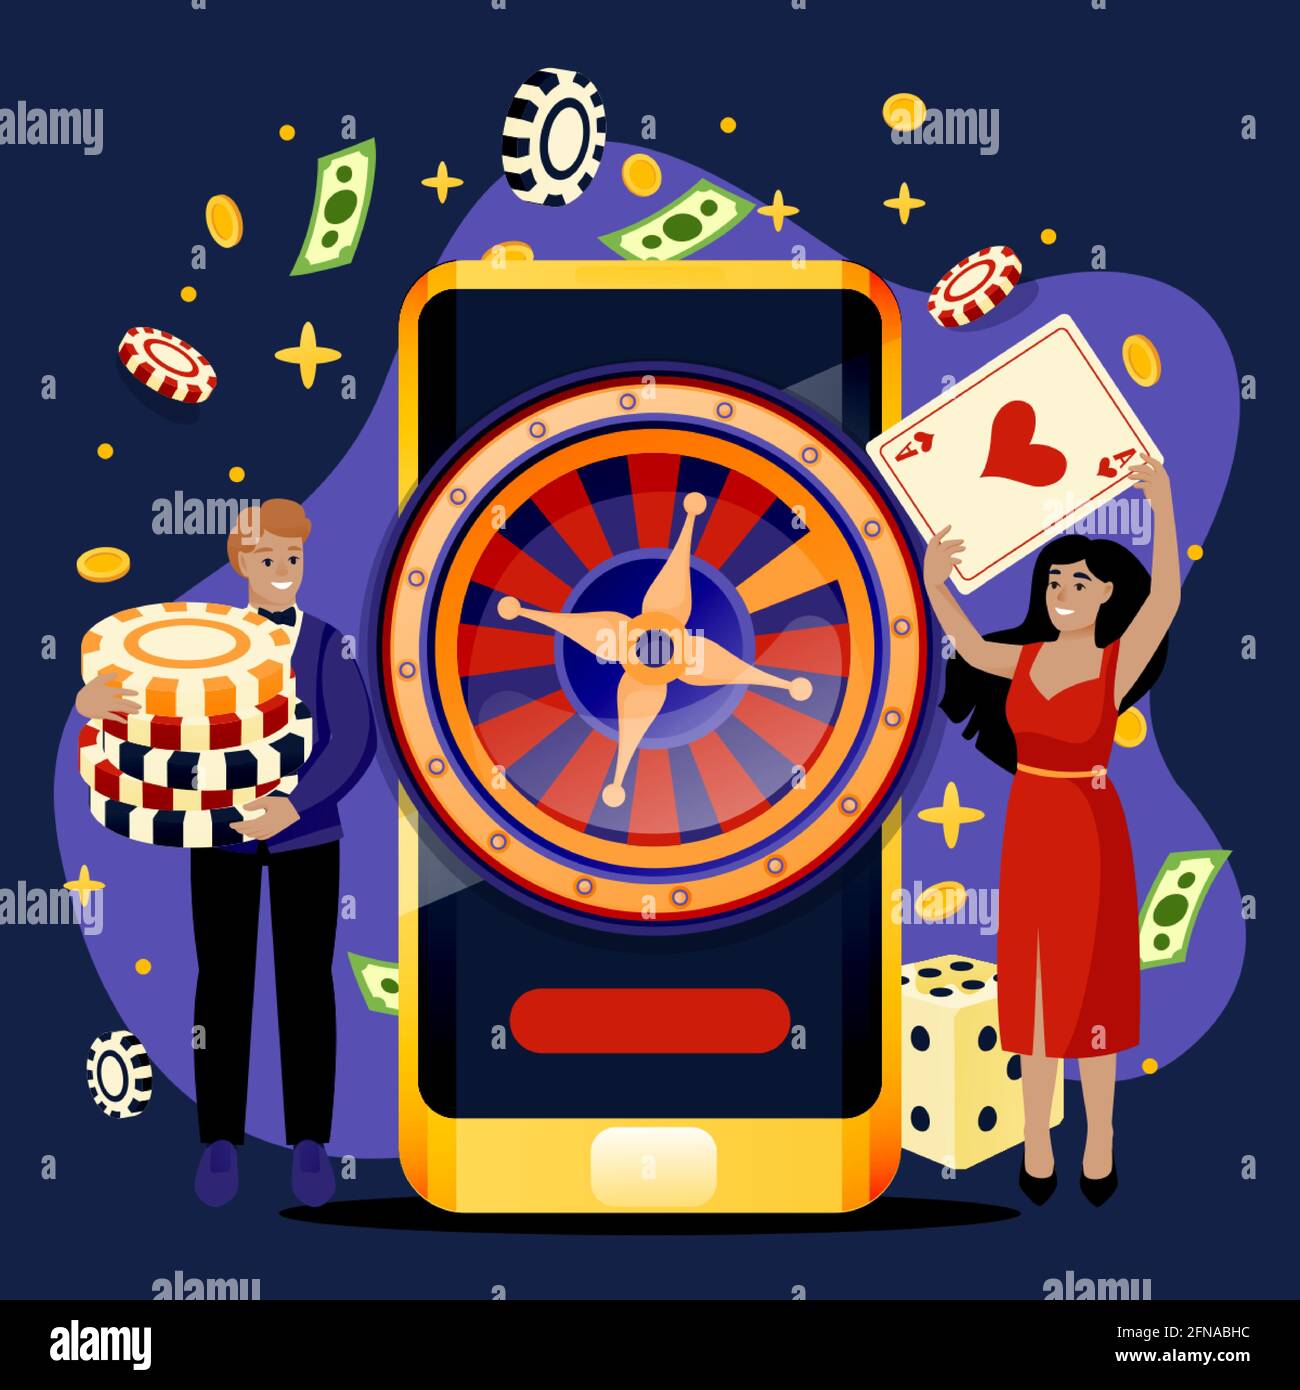 Grunge Casino Roulette Addiction Funny Game Vector Illustration Royalty  Free SVG, Cliparts, Vectors, and Stock Illustration. Image 104782734.